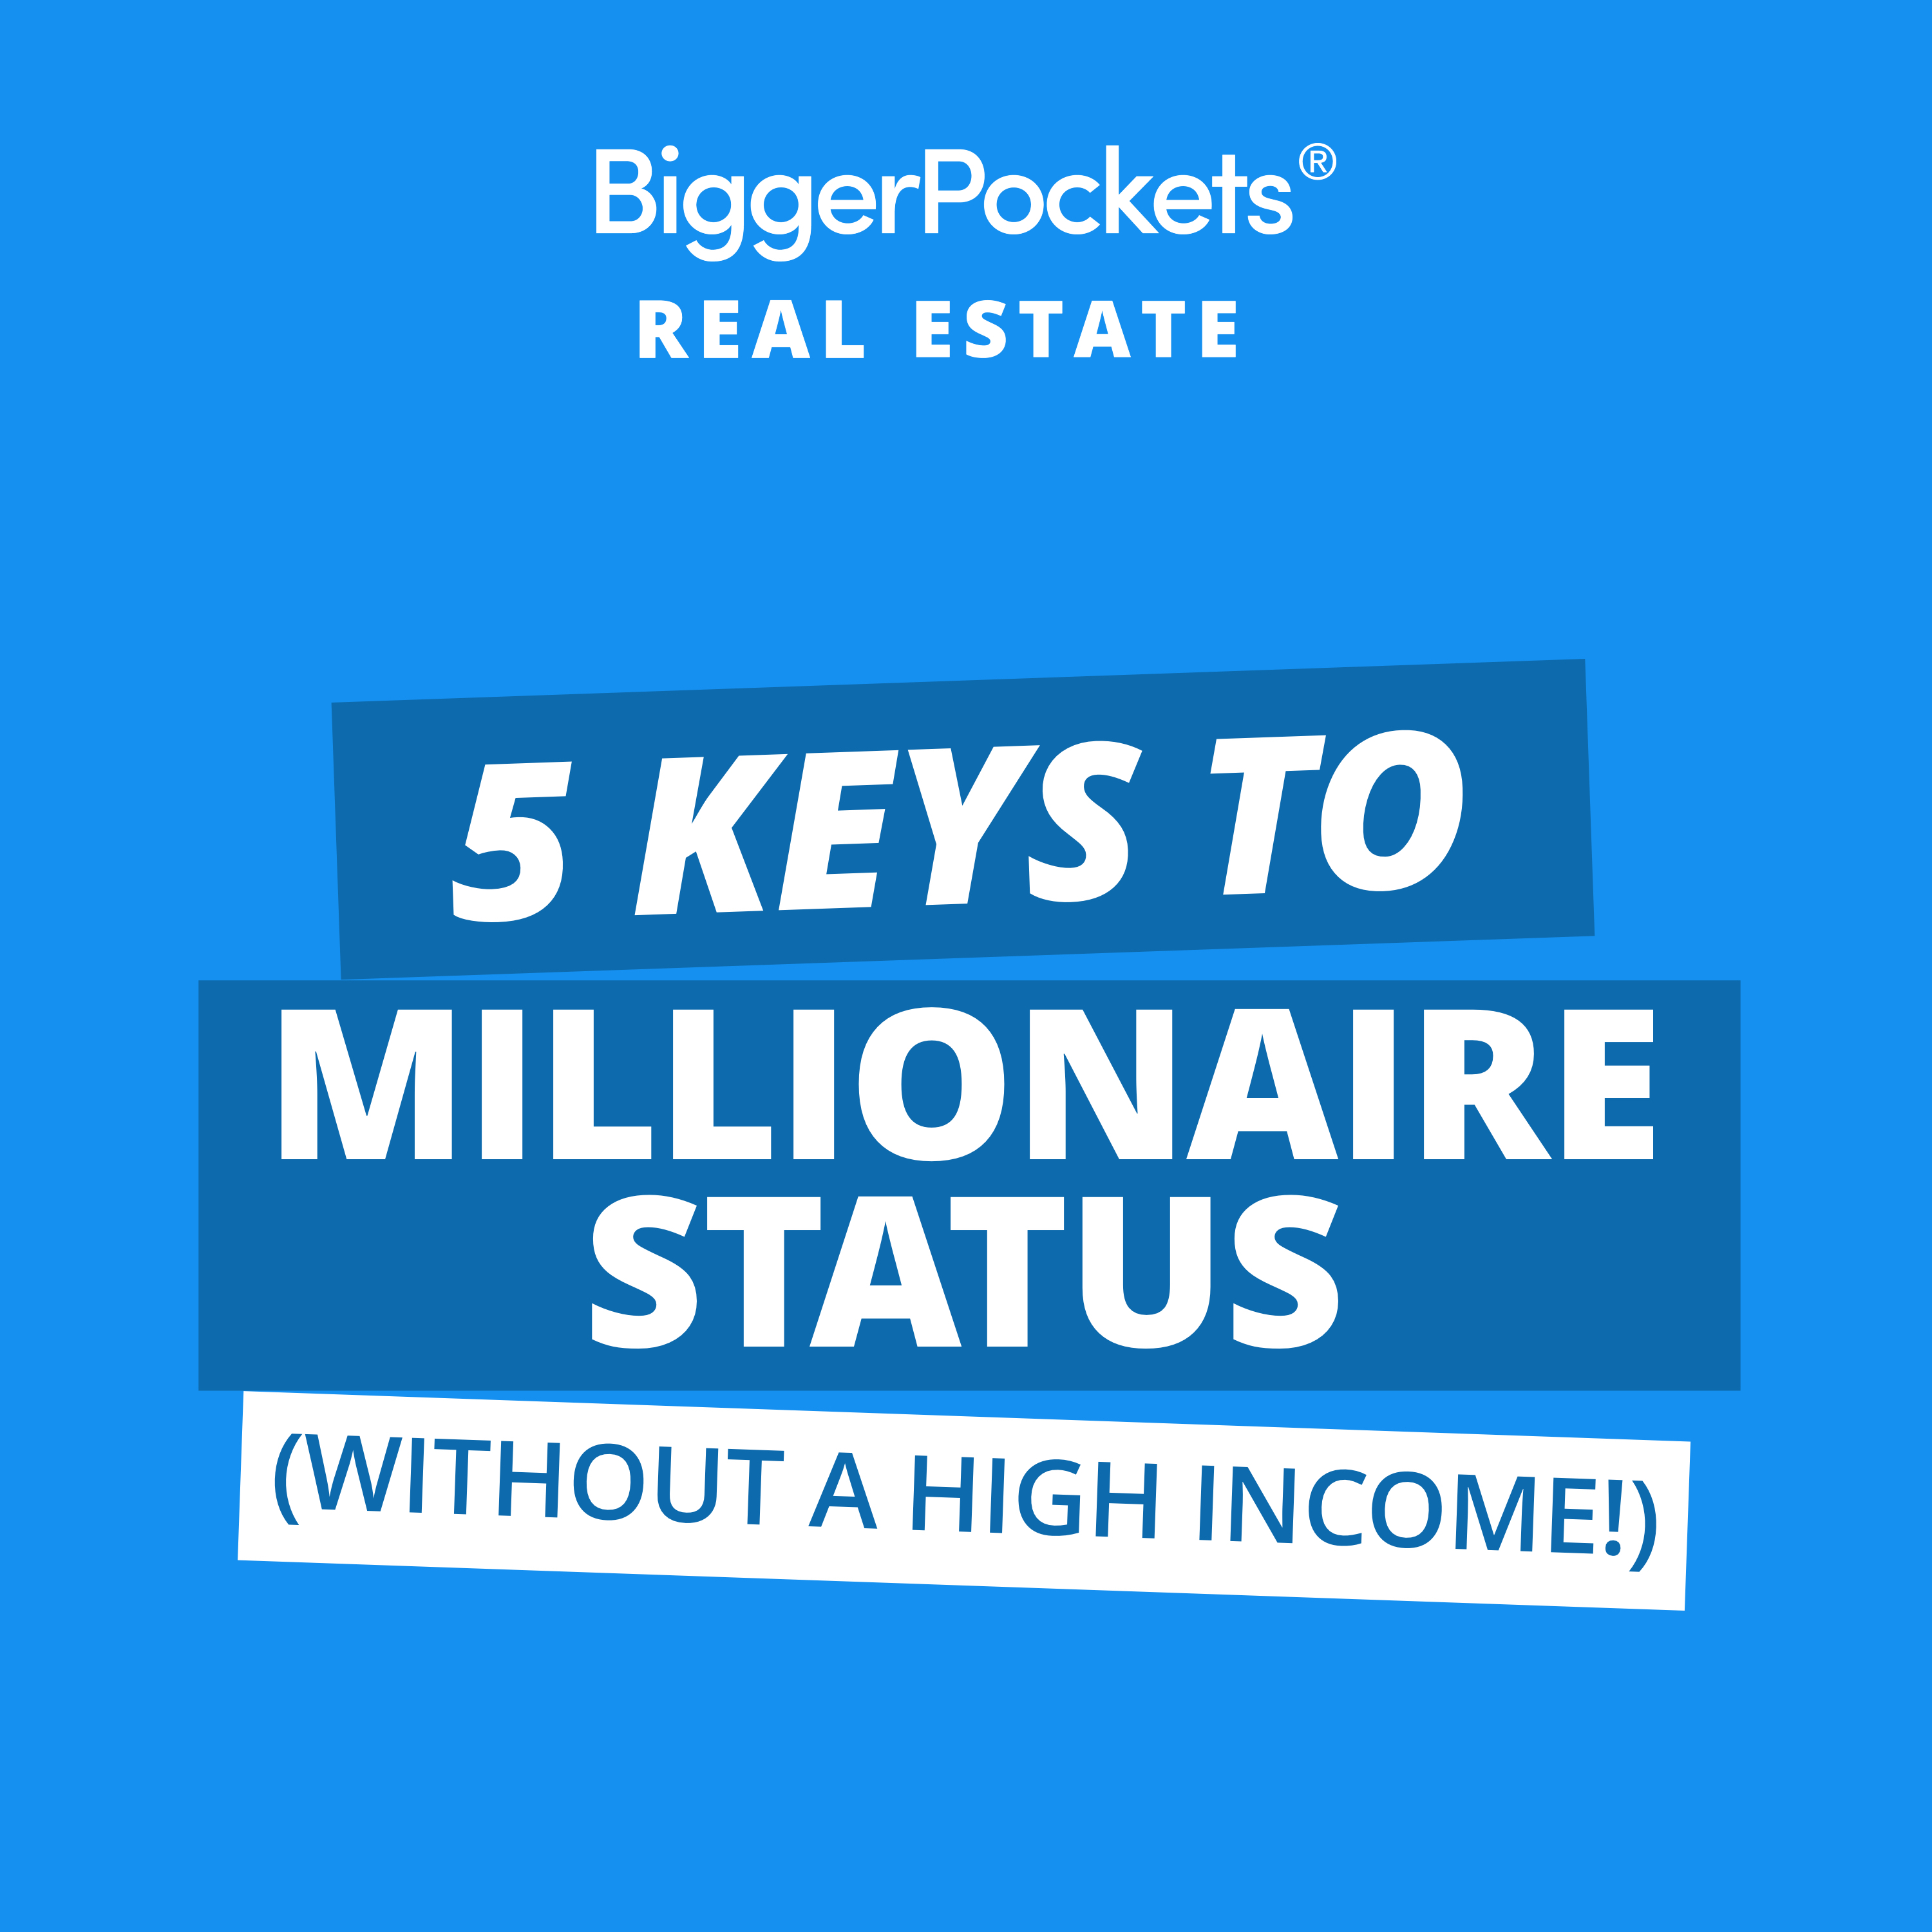 519: 5 Keys to Becoming a Millionaire on Less Than $100k Per Year